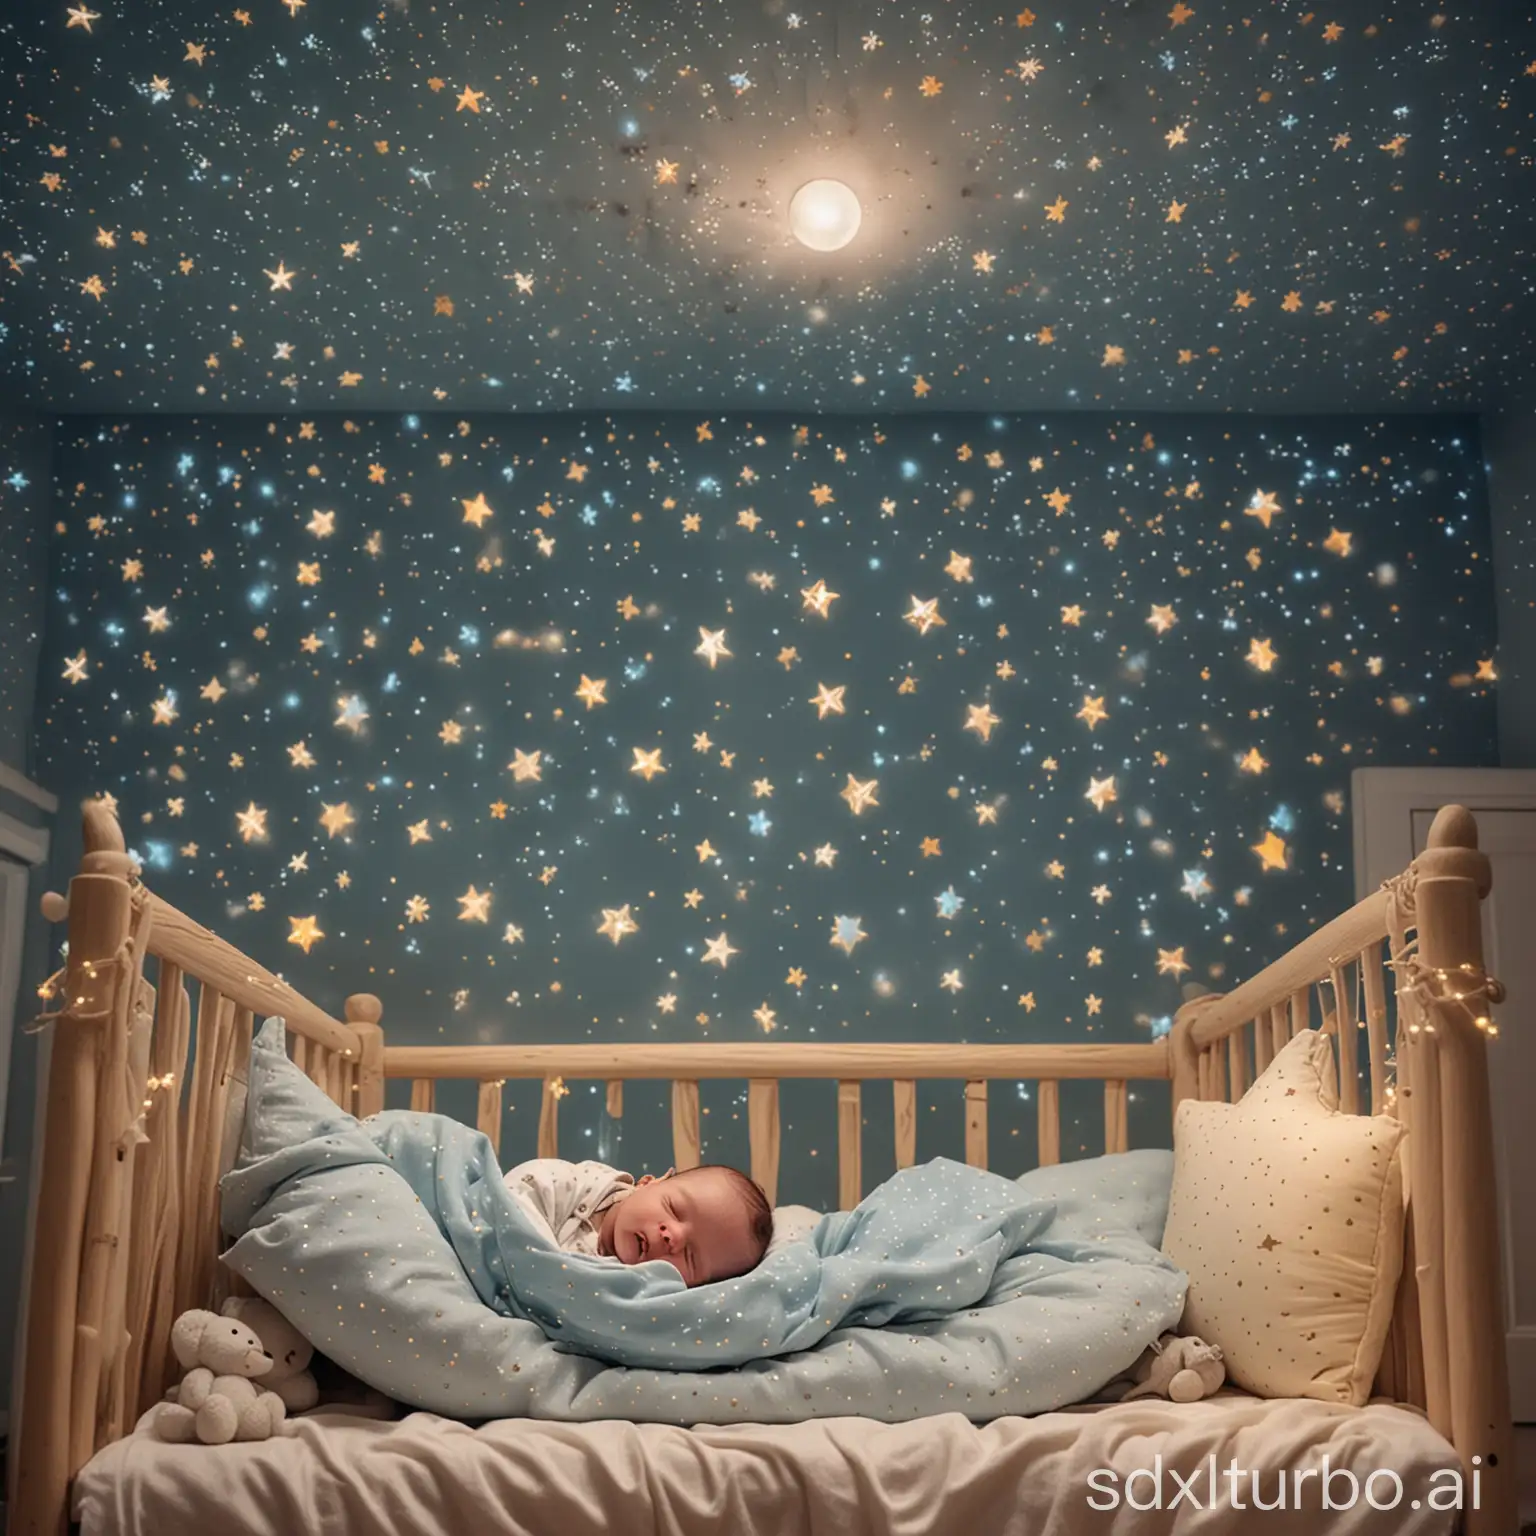 A few months old baby lies on its back in a wooden crib, surrounded by soft pillows and blankets in pastel tones. A starry sky night light projects sparkling stars and moon phases on the ceiling. The room walls are painted in calming blue, and here and there glitter small star stickers. The baby has its tiny hands stretched over its head, eyes tightly shut, while breathing deeply and evenly. The gentle melody of a music box plays softly in the background, and the whole room exudes a cozy tranquility that lulls the baby into deep, dreamy sleep.